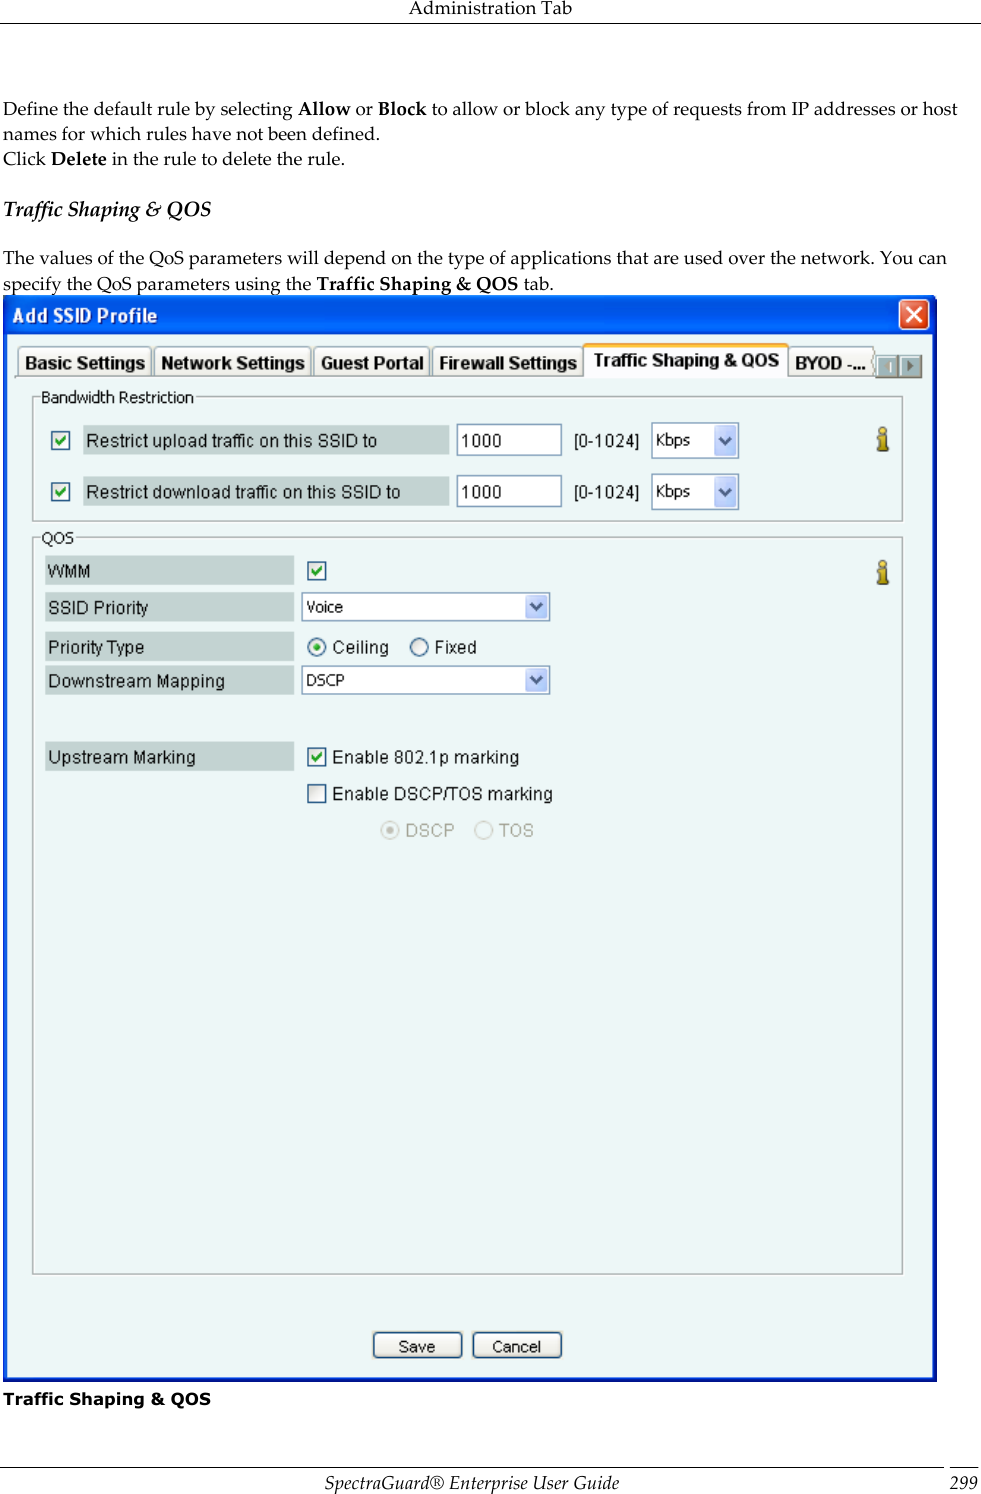 Administration Tab SpectraGuard®  Enterprise User Guide 299   Define the default rule by selecting Allow or Block to allow or block any type of requests from IP addresses or host names for which rules have not been defined. Click Delete in the rule to delete the rule. Traffic Shaping &amp; QOS The values of the QoS parameters will depend on the type of applications that are used over the network. You can specify the QoS parameters using the Traffic Shaping &amp; QOS tab.  Traffic Shaping &amp; QOS 